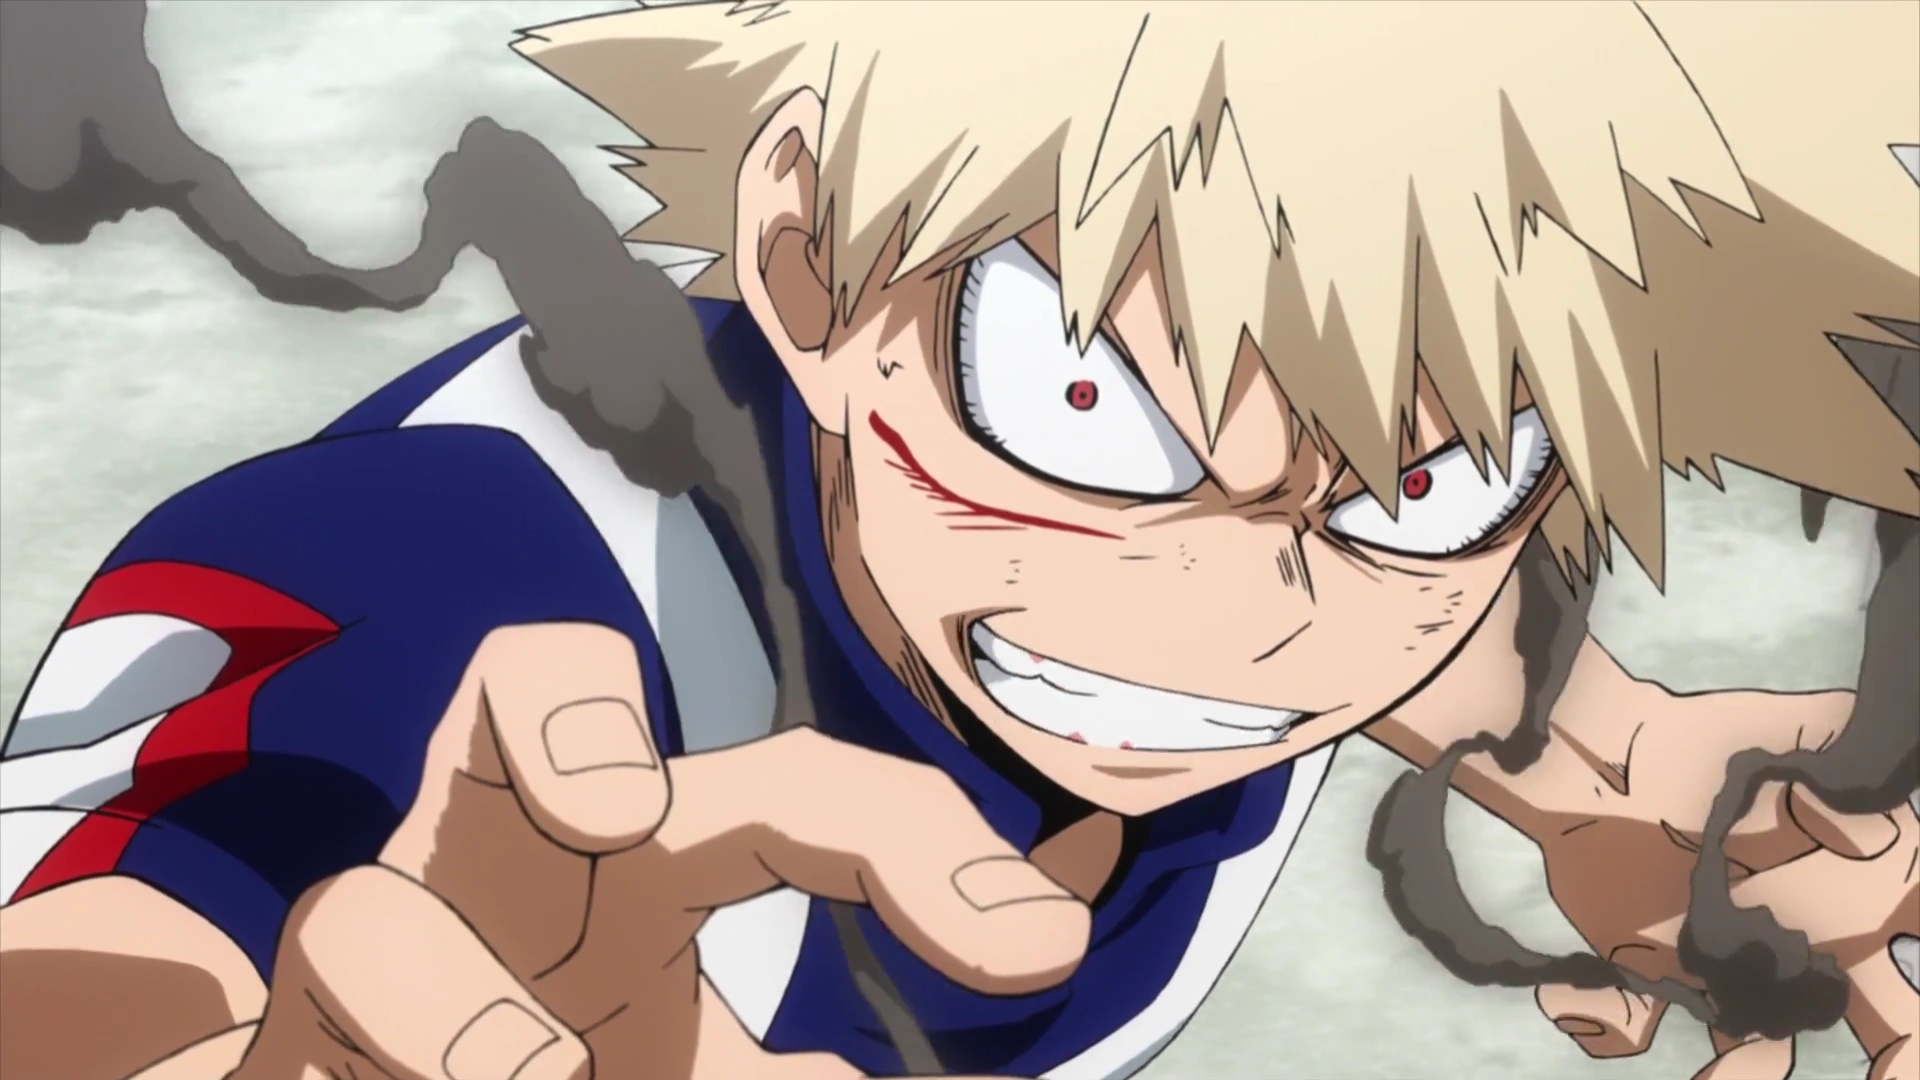 Bakugo's worried that his friends smoking (manga) or hanging out with girls  (anime) could get him banned from UA... but destroying school property and  attacking someone won't? Was he just being overly